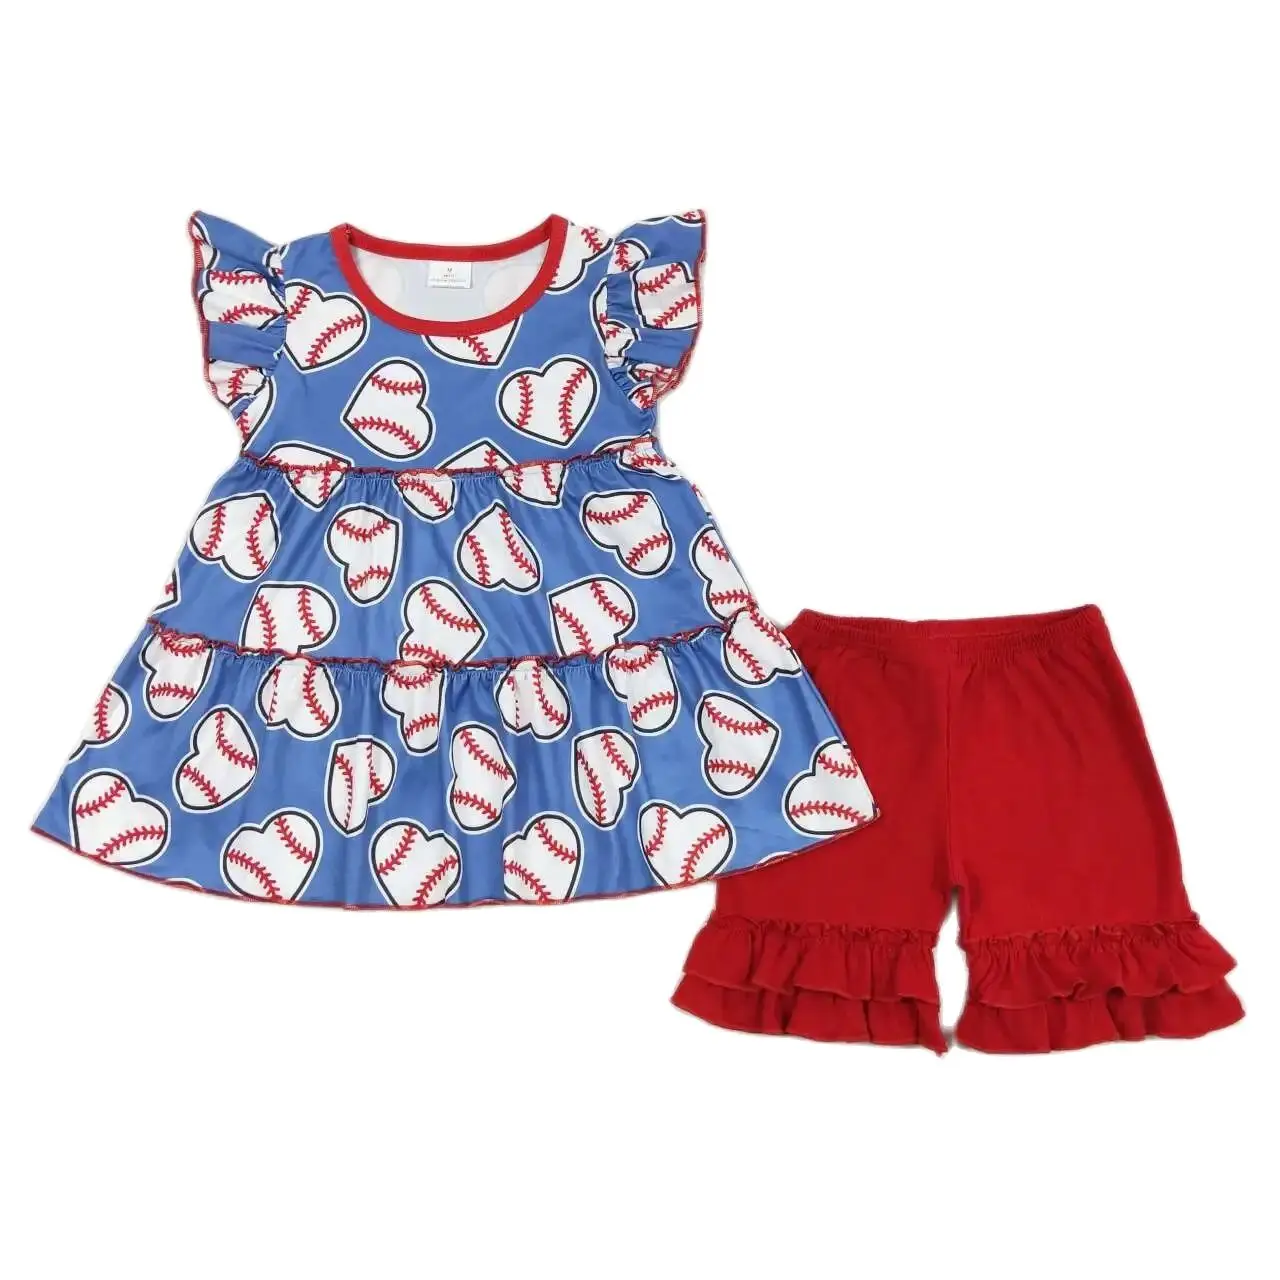 

Wholesale Boutique Baby Girl Set Toddler Ball Short Sleeves Baseball Hearts Tunic Kids Ruffle Red Shorts Children Summer Outfit